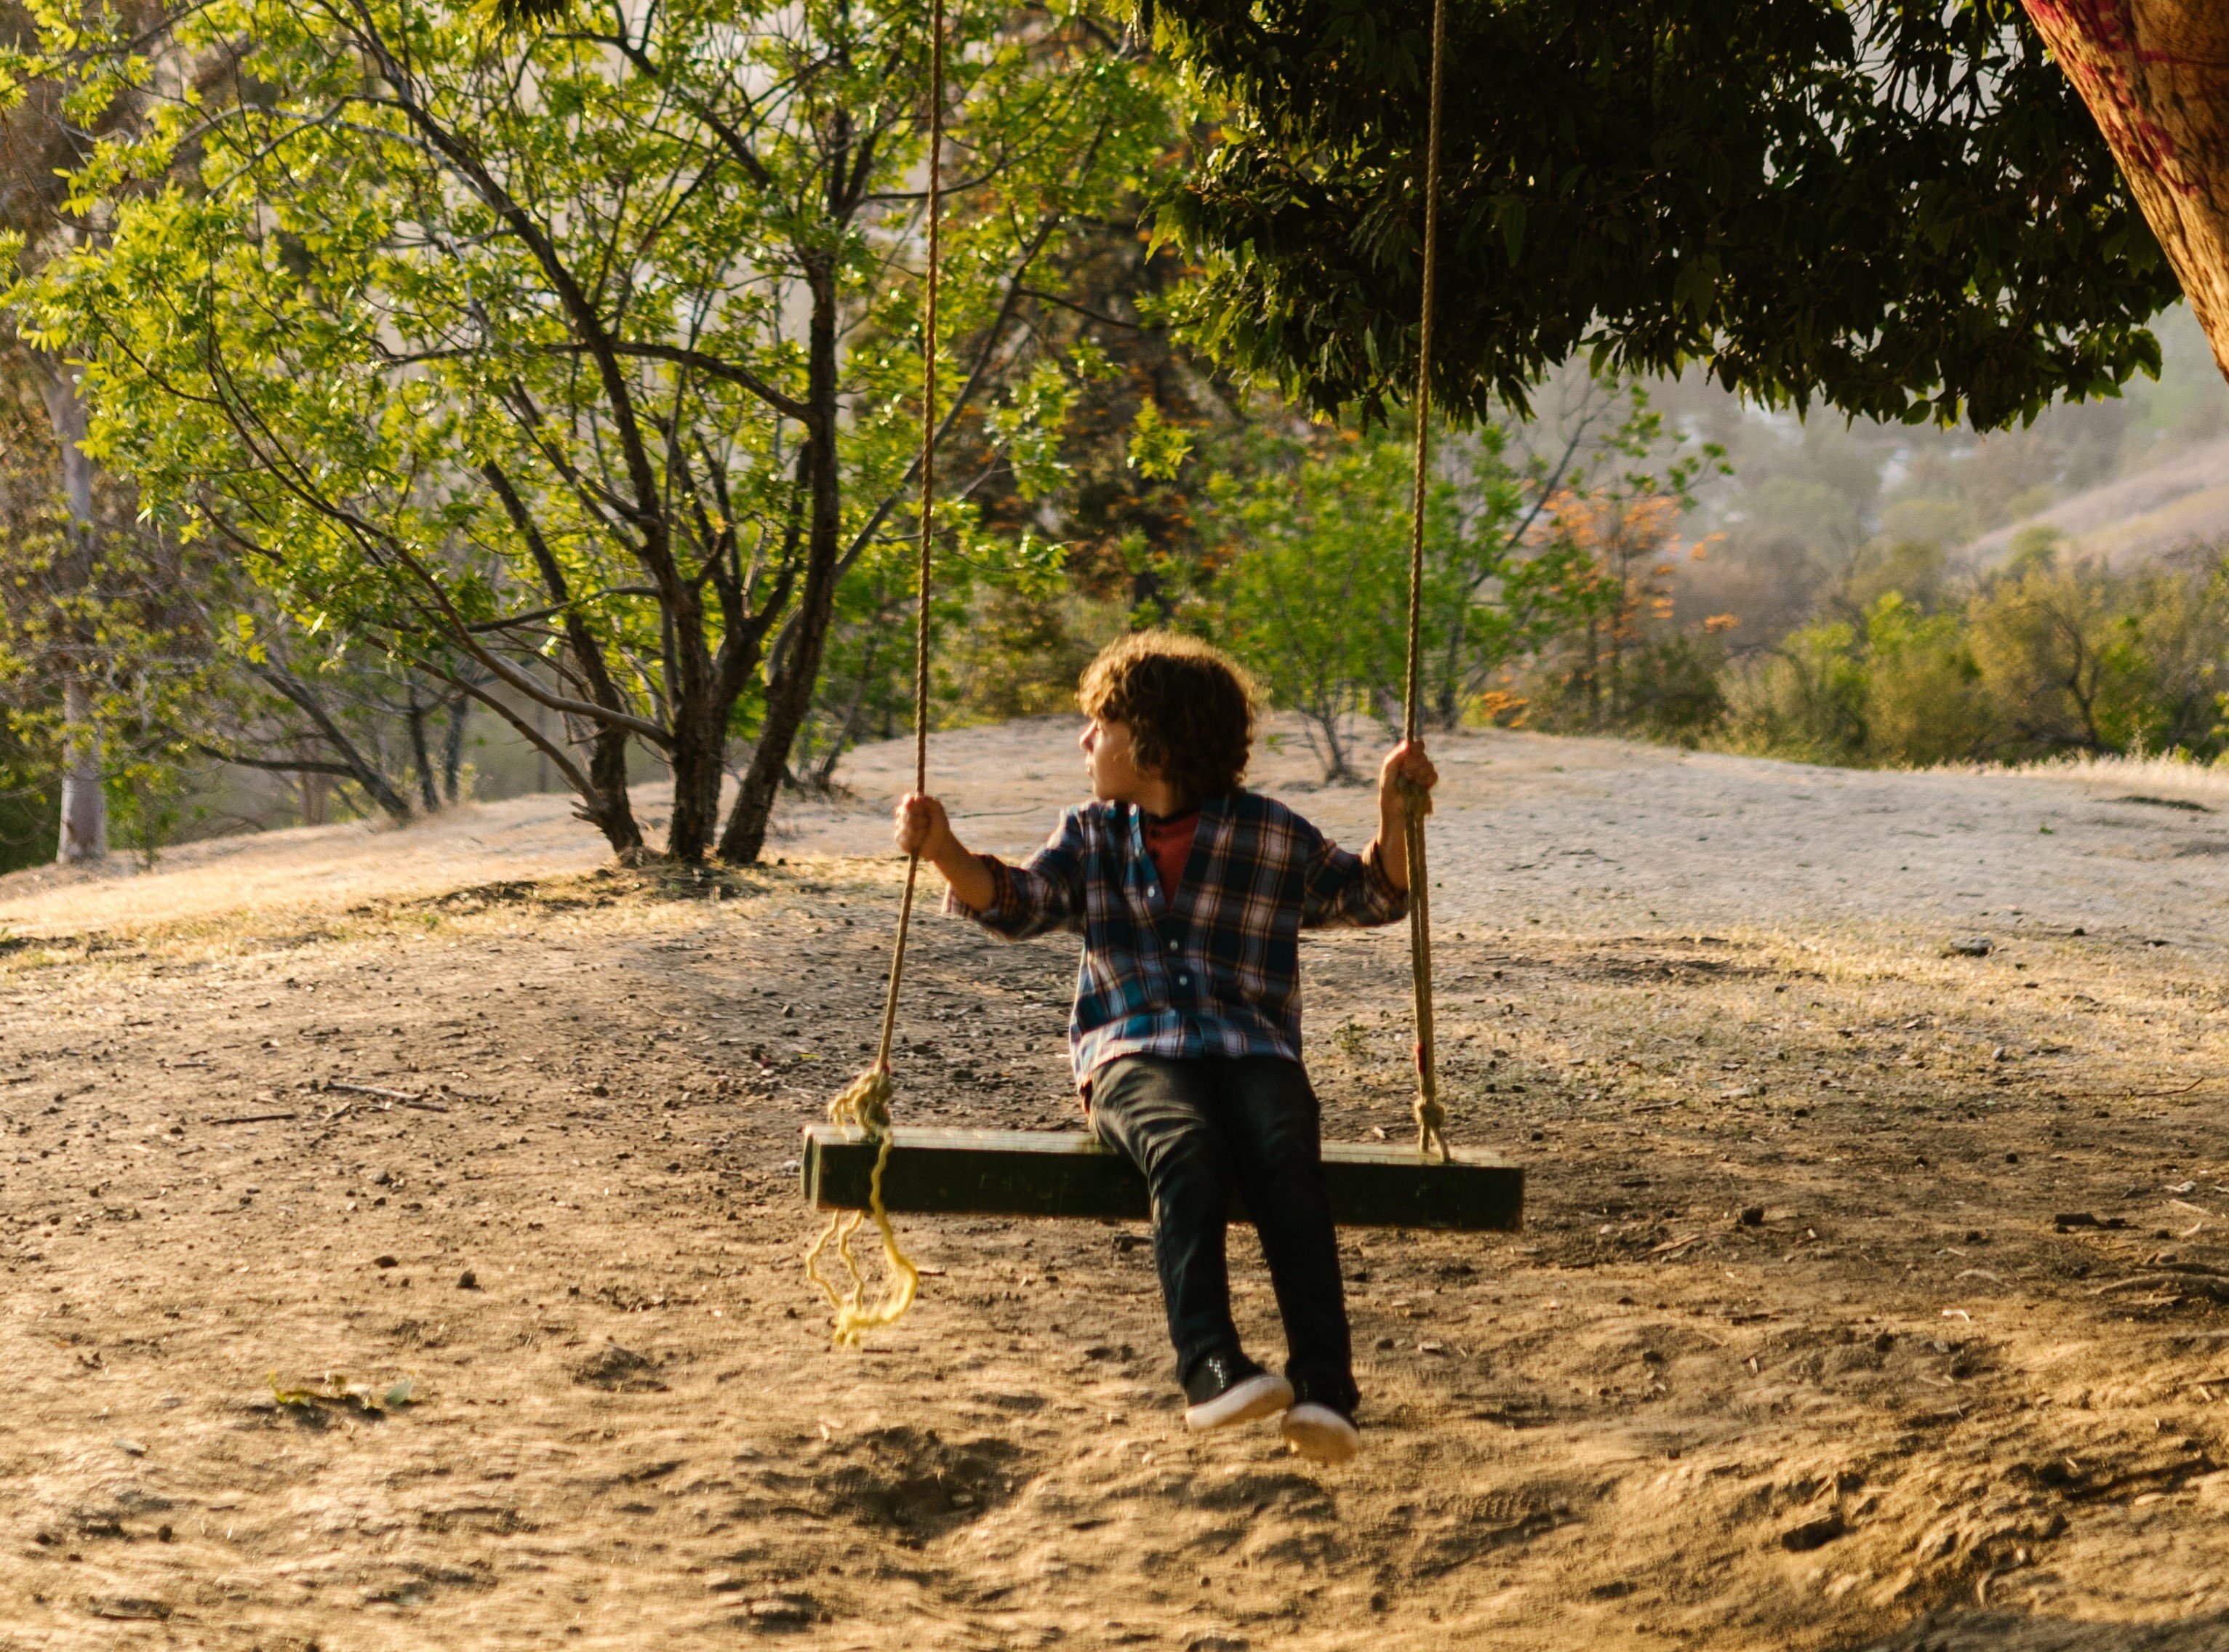 Ken arrived with his friends to push OP off the swing | Photo: Pexels